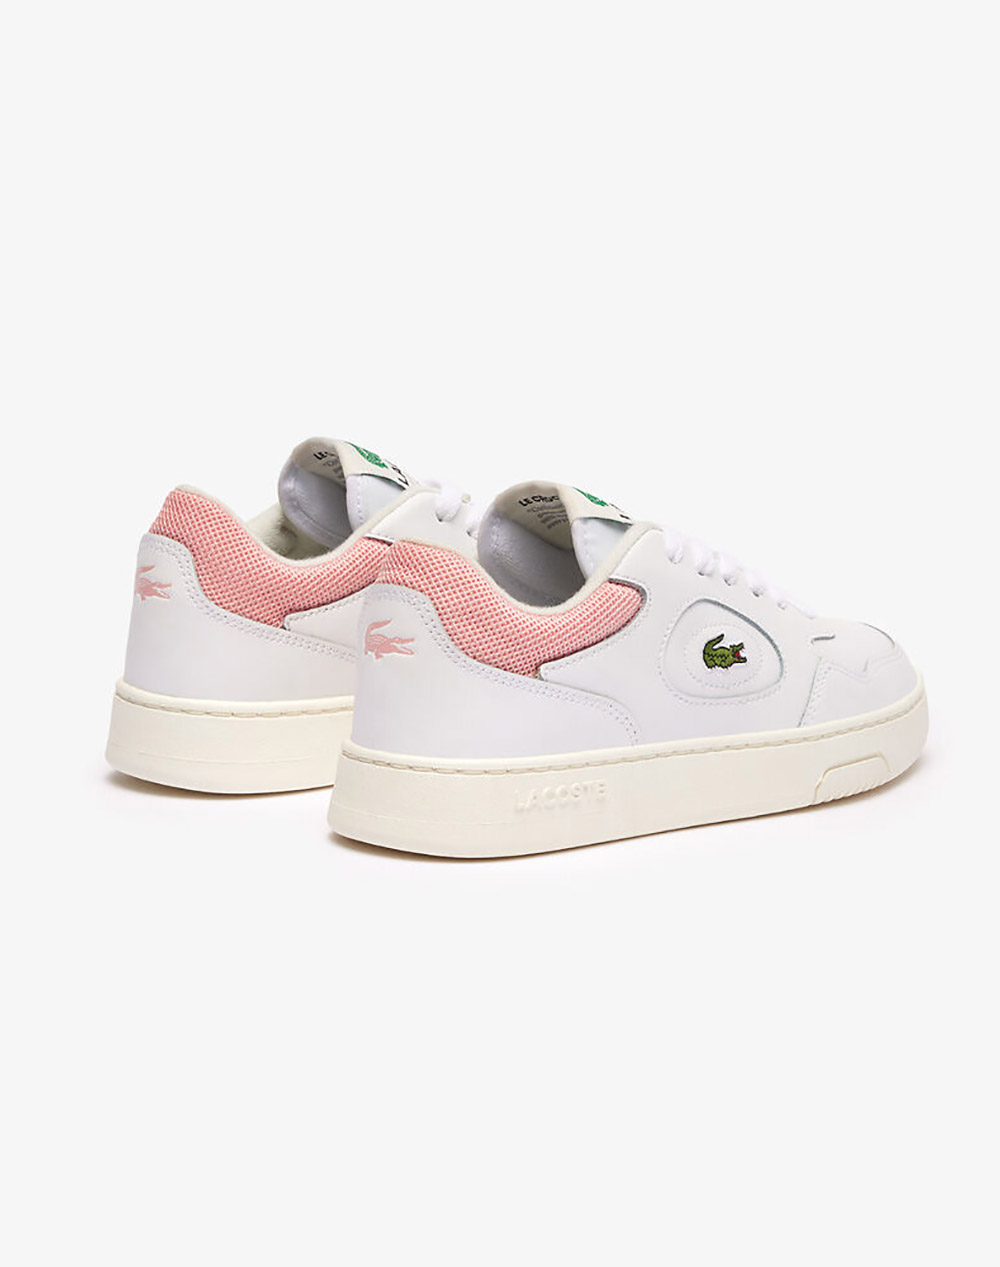 LACOSTE WOMENS SHOES LINESET 124 2 SFA